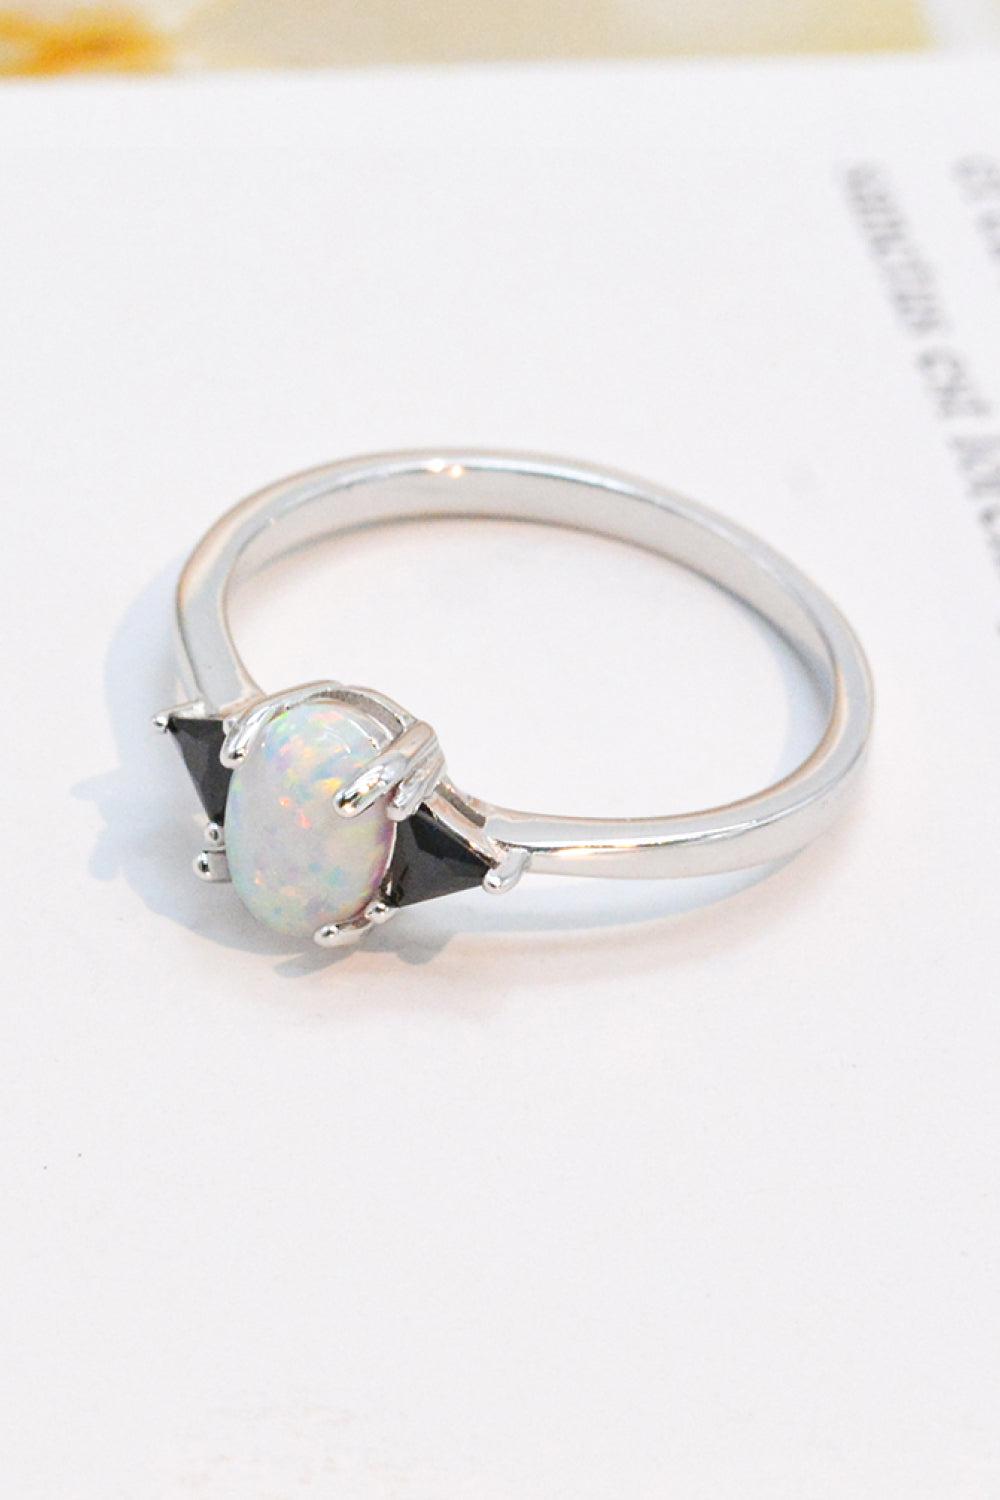 Contrast 925 Sterling Silver Opal Ring BLUE ZONE PLANET